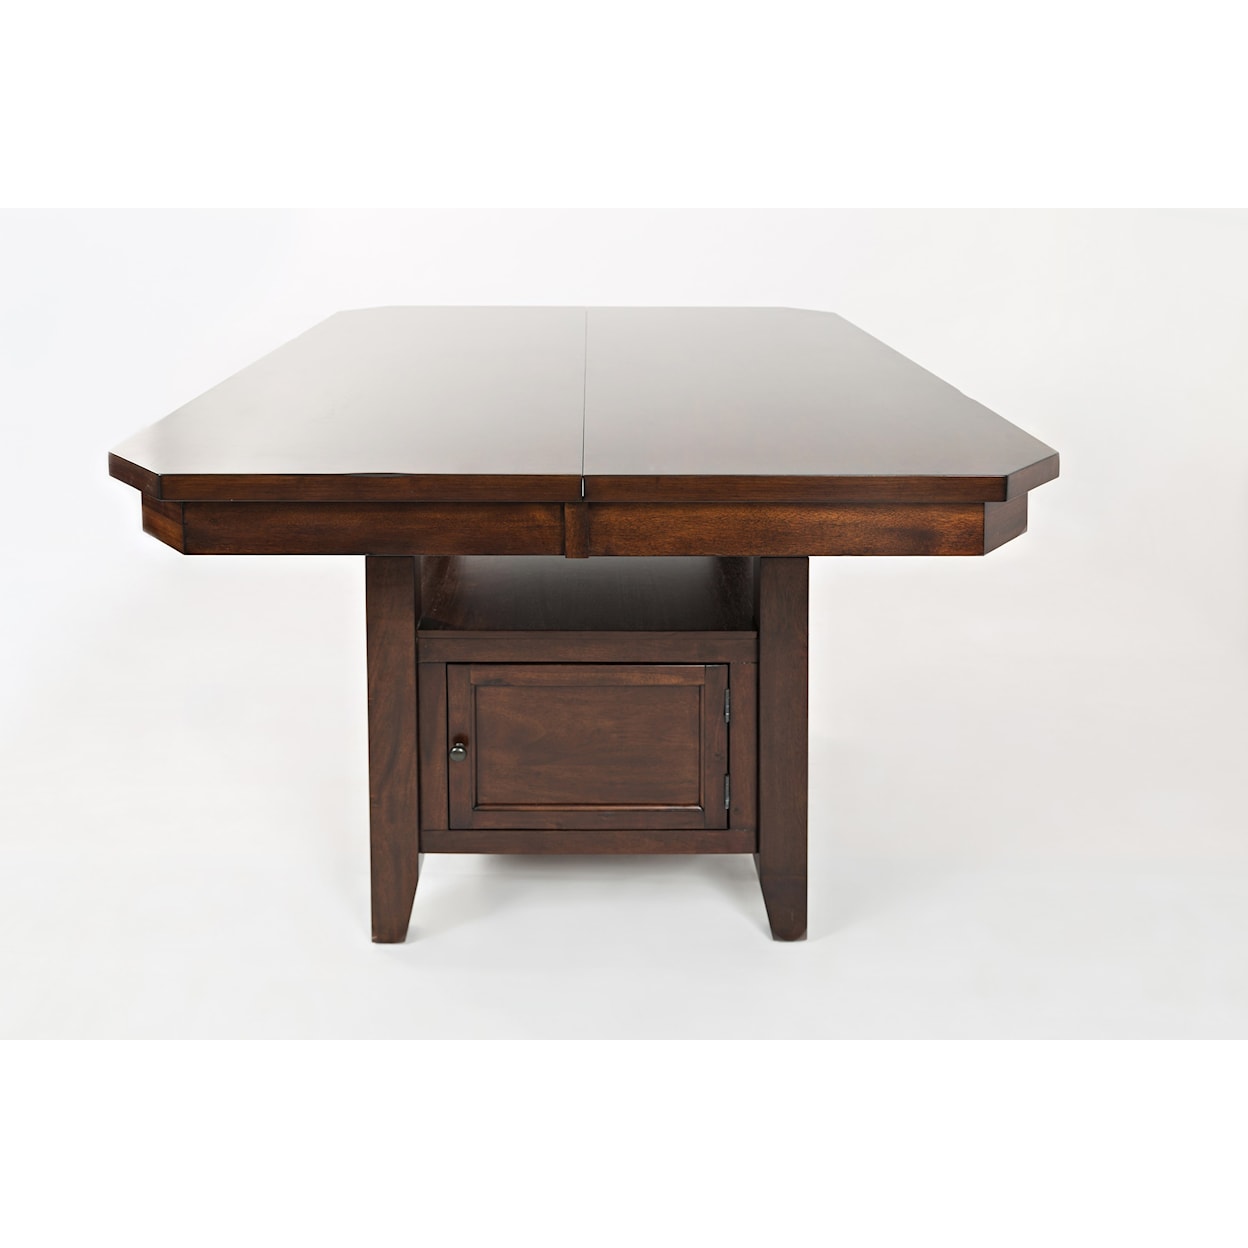 Jofran Manchester High/Low Table with Storage Base